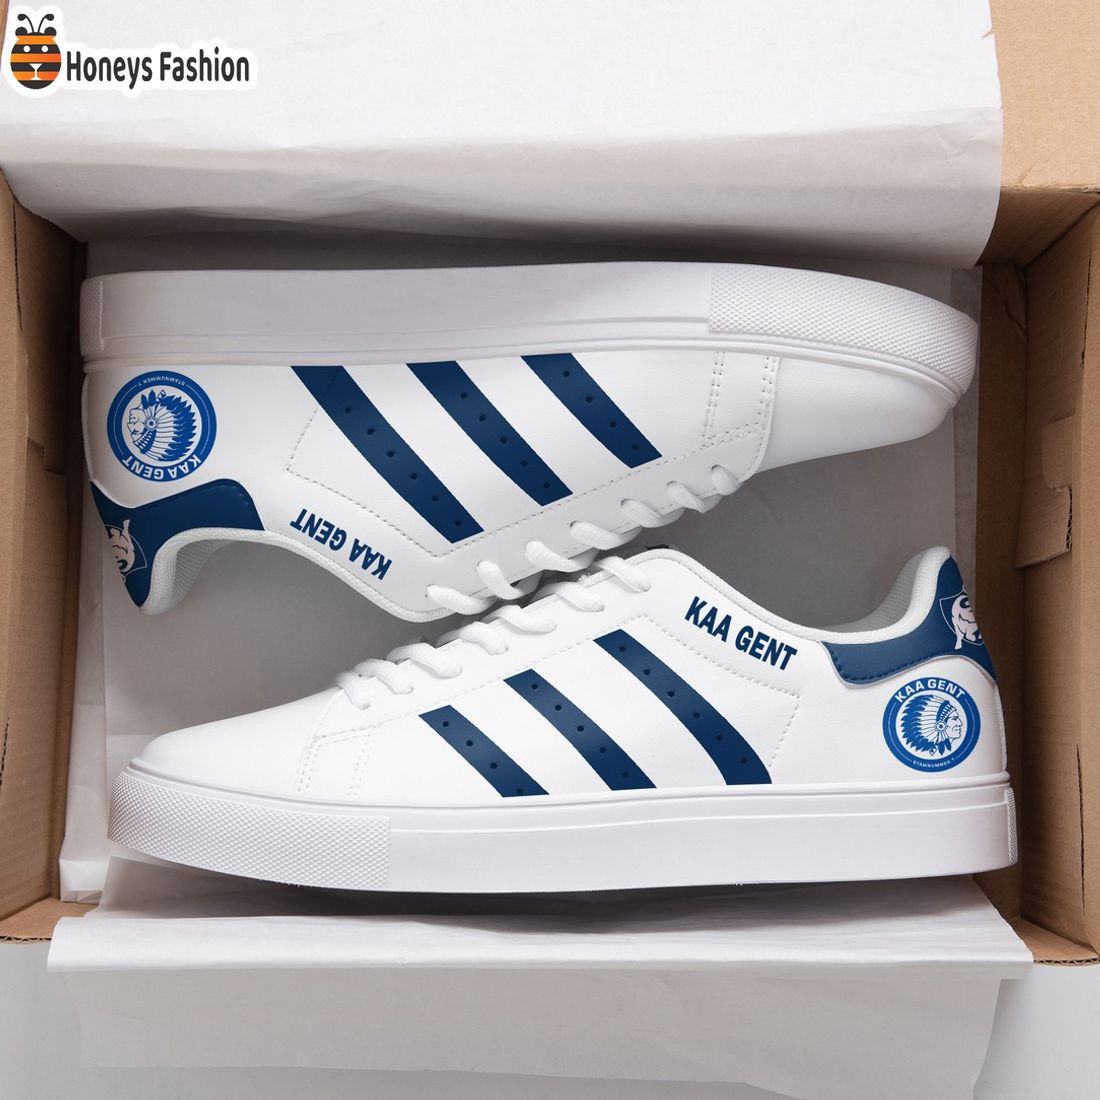 KAA Gent Stan Smith Adidas Shoes